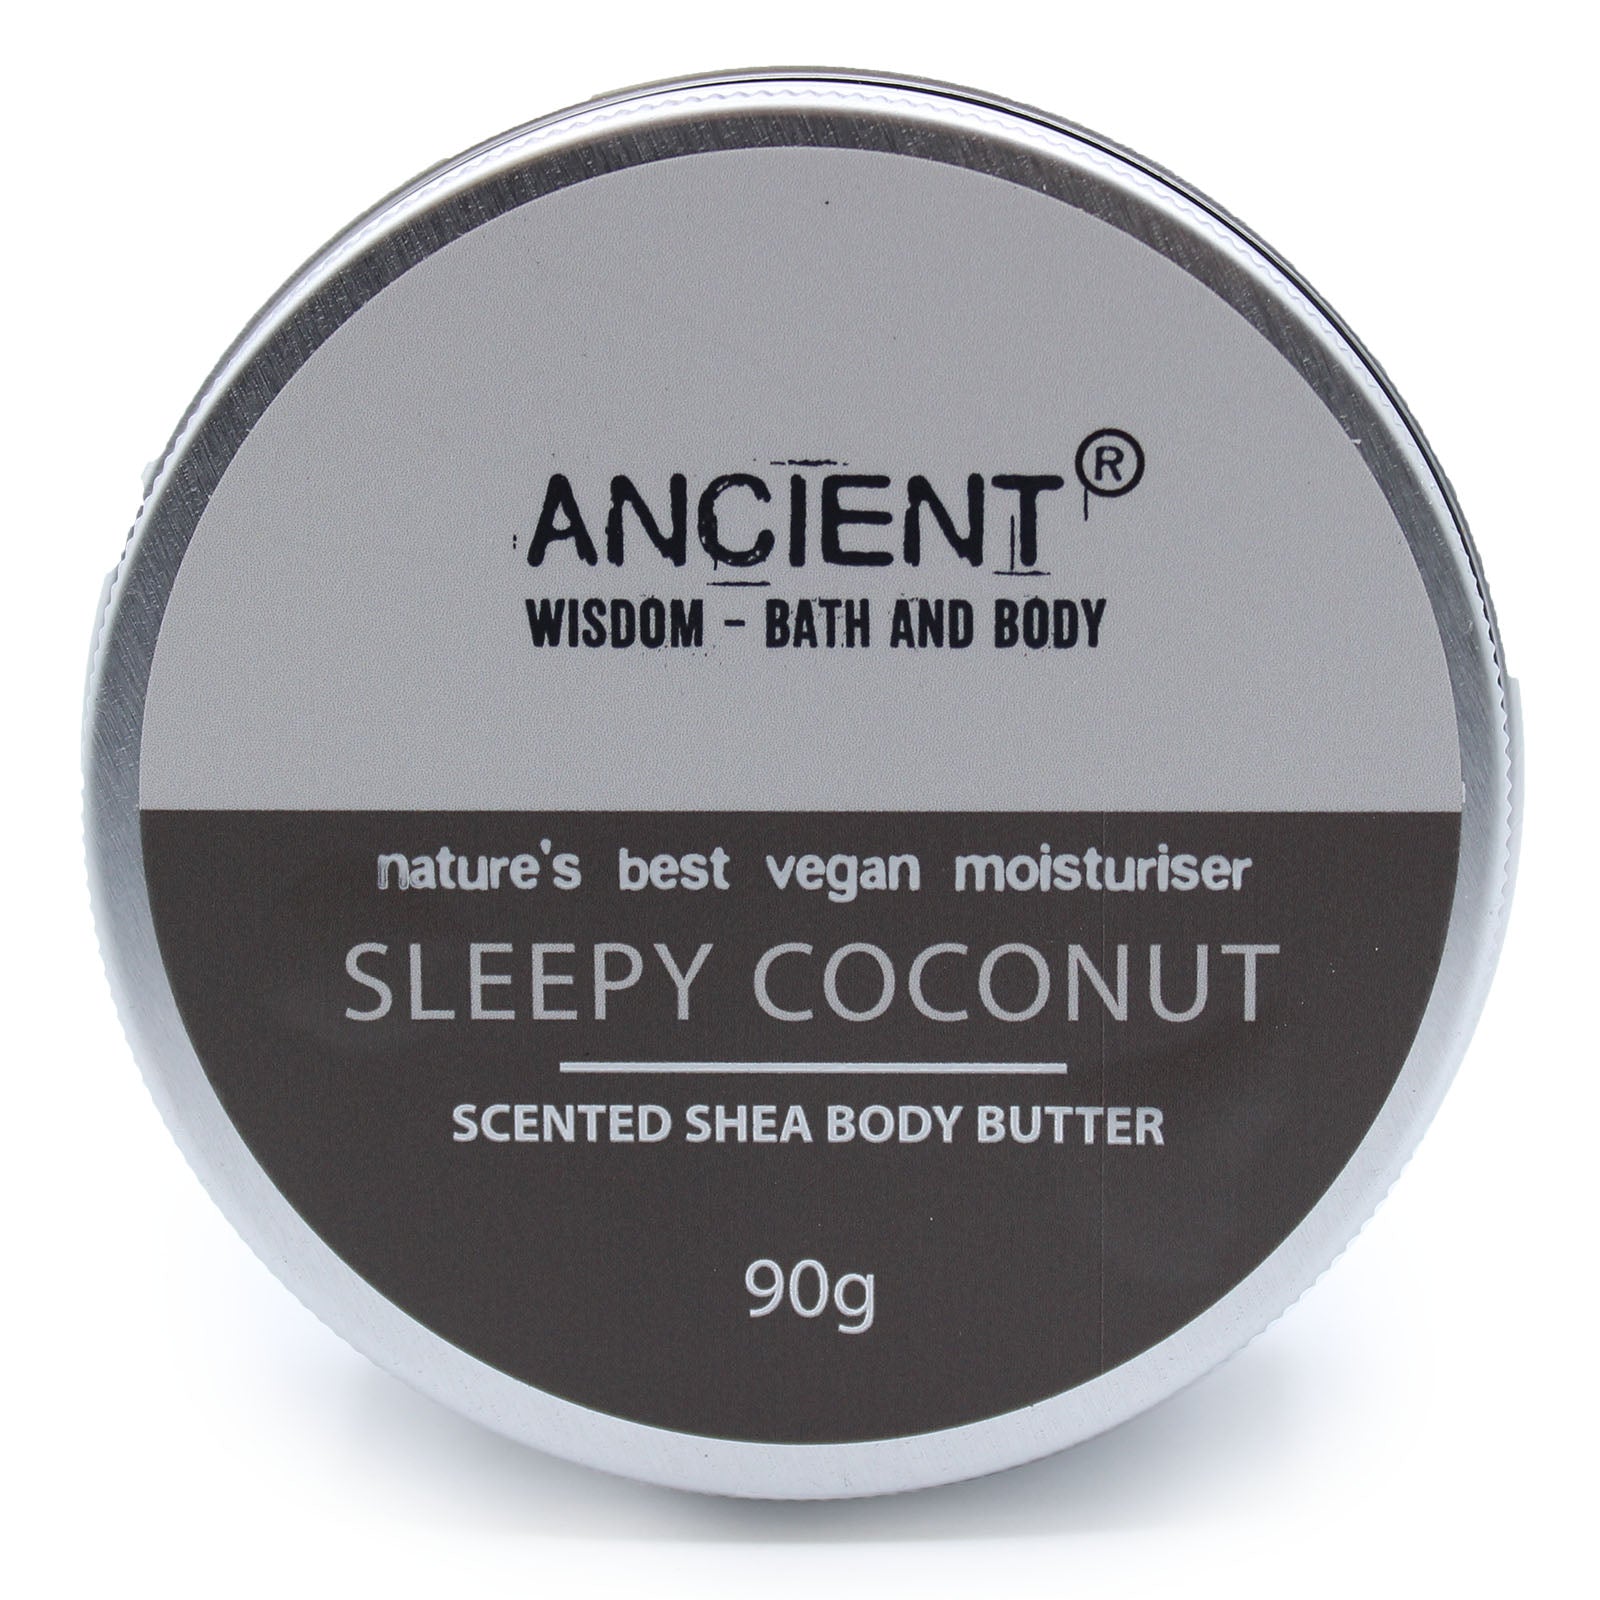 View Scented Shea Body Butter 90g Sleepy Coconut information